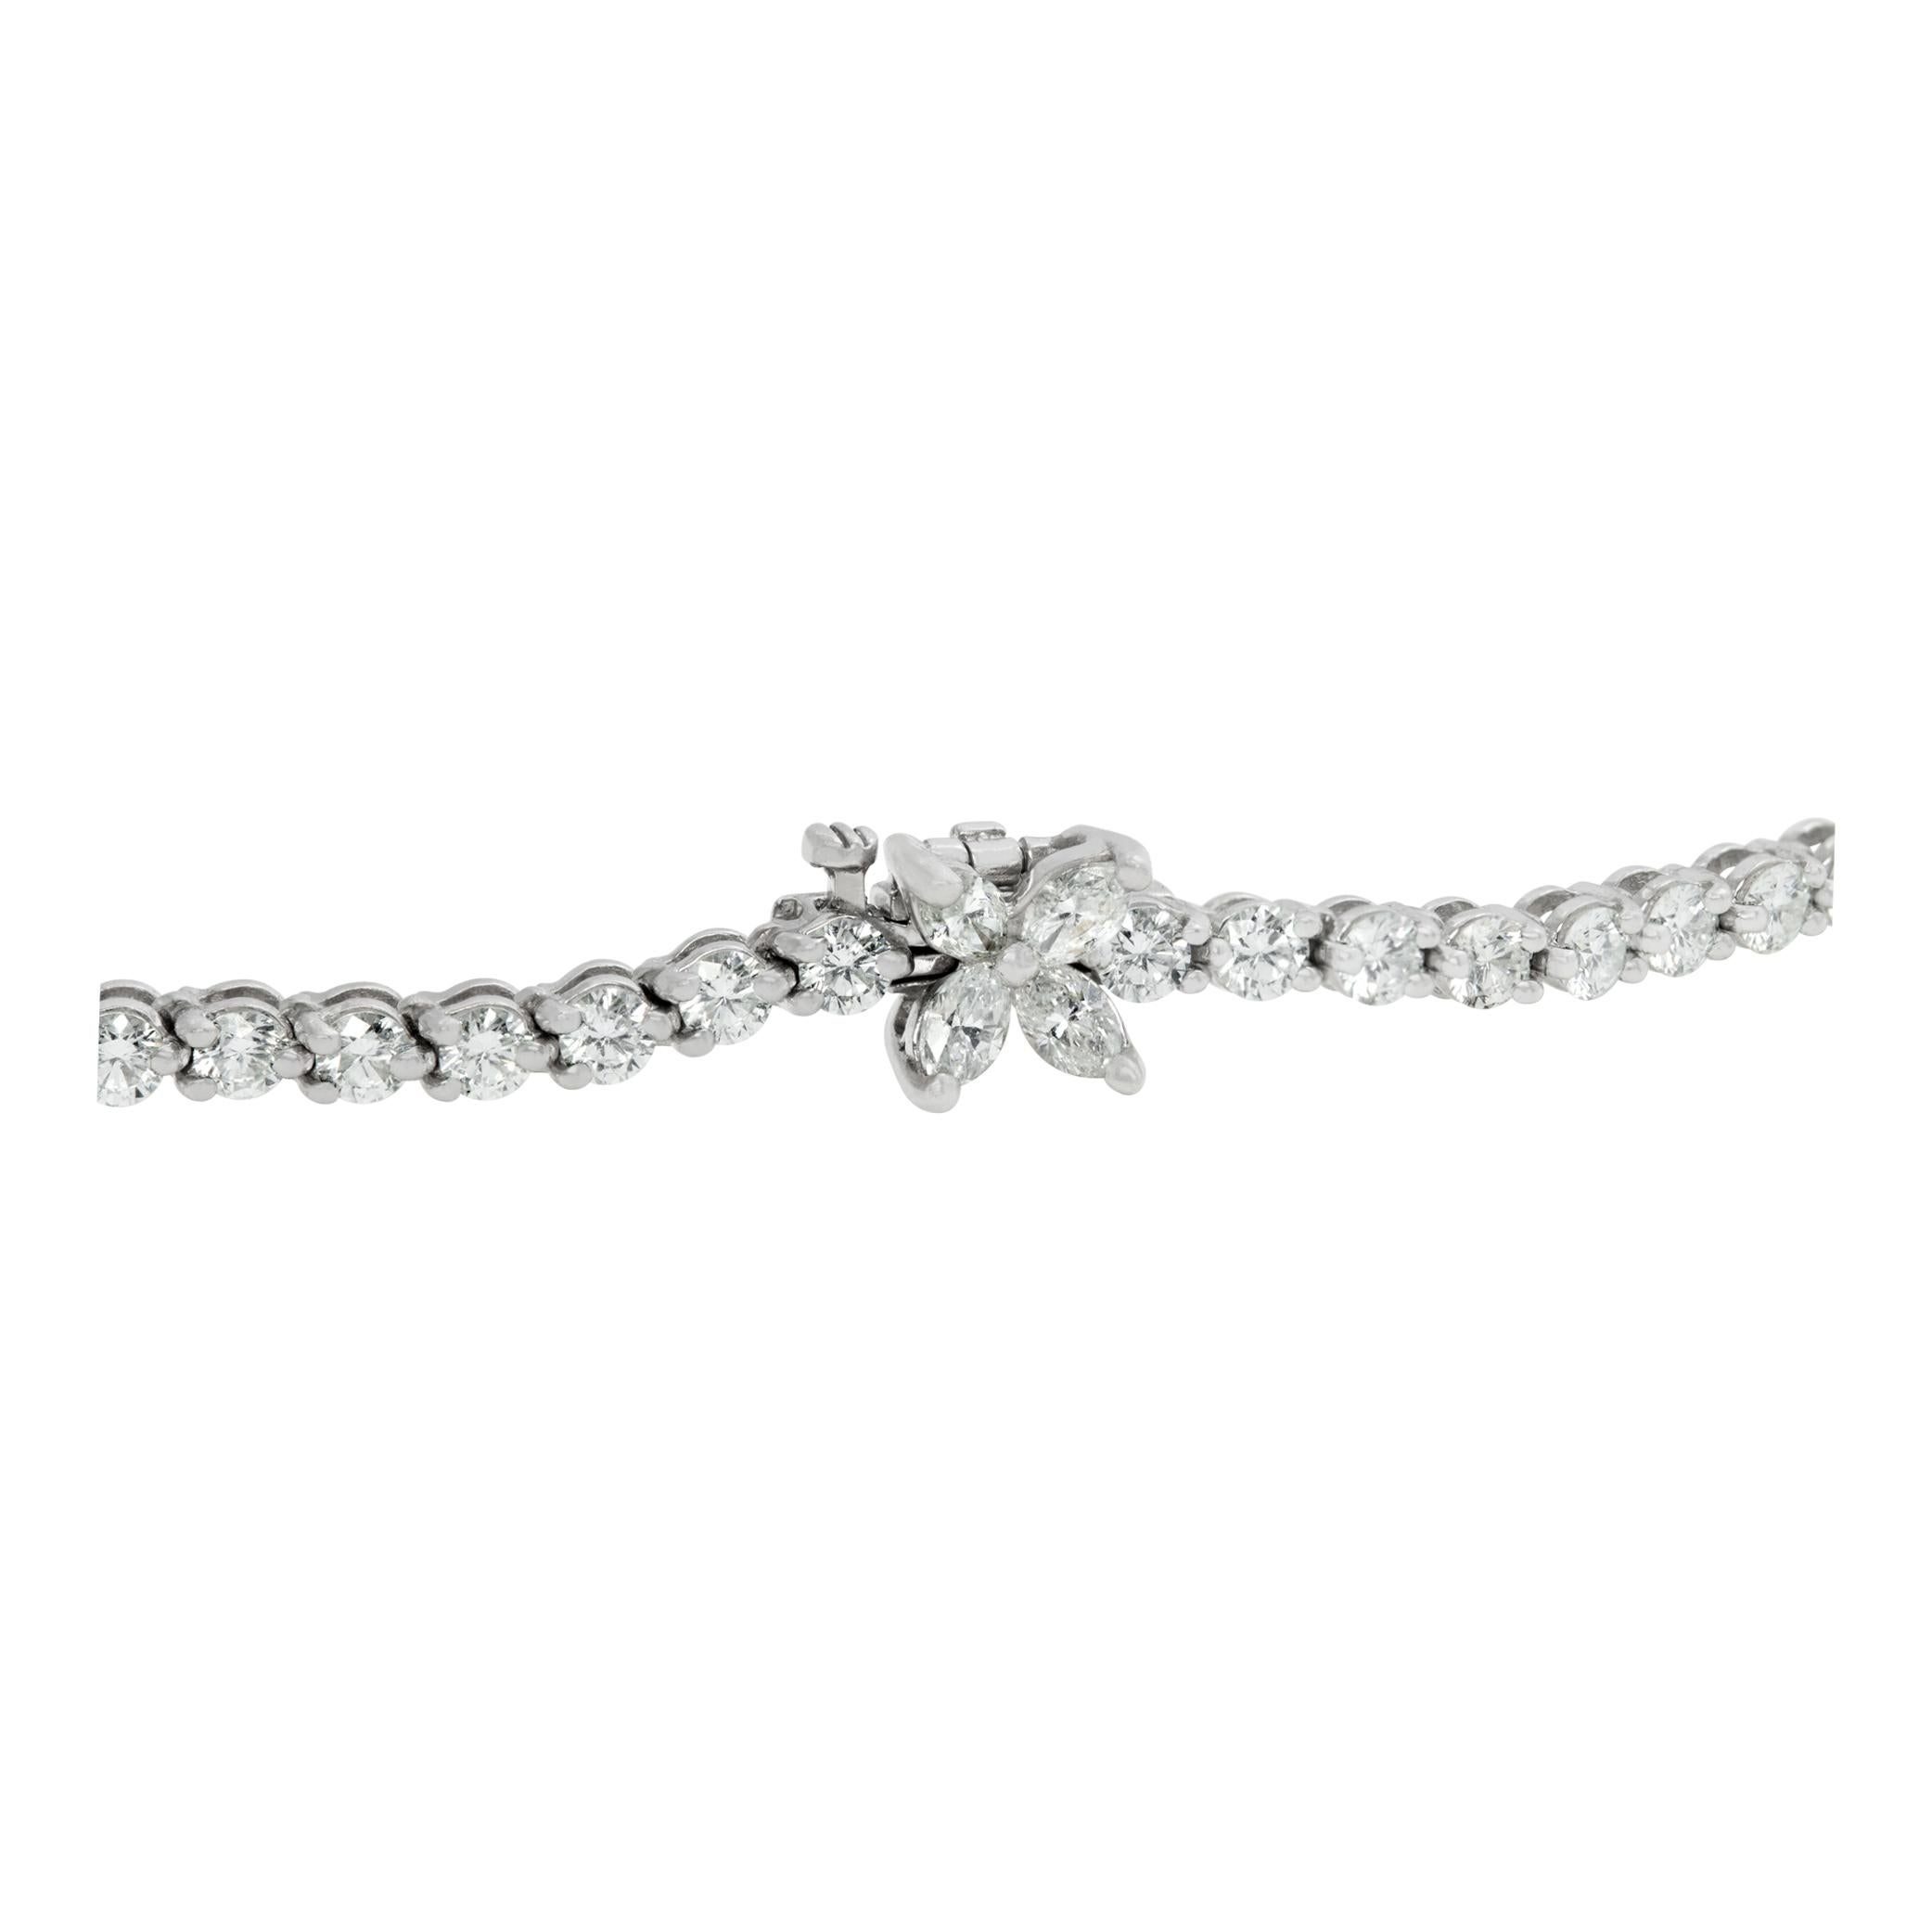 Women's Platinum Tiffany & Co. graduated diamond necklace from the Victoria collection